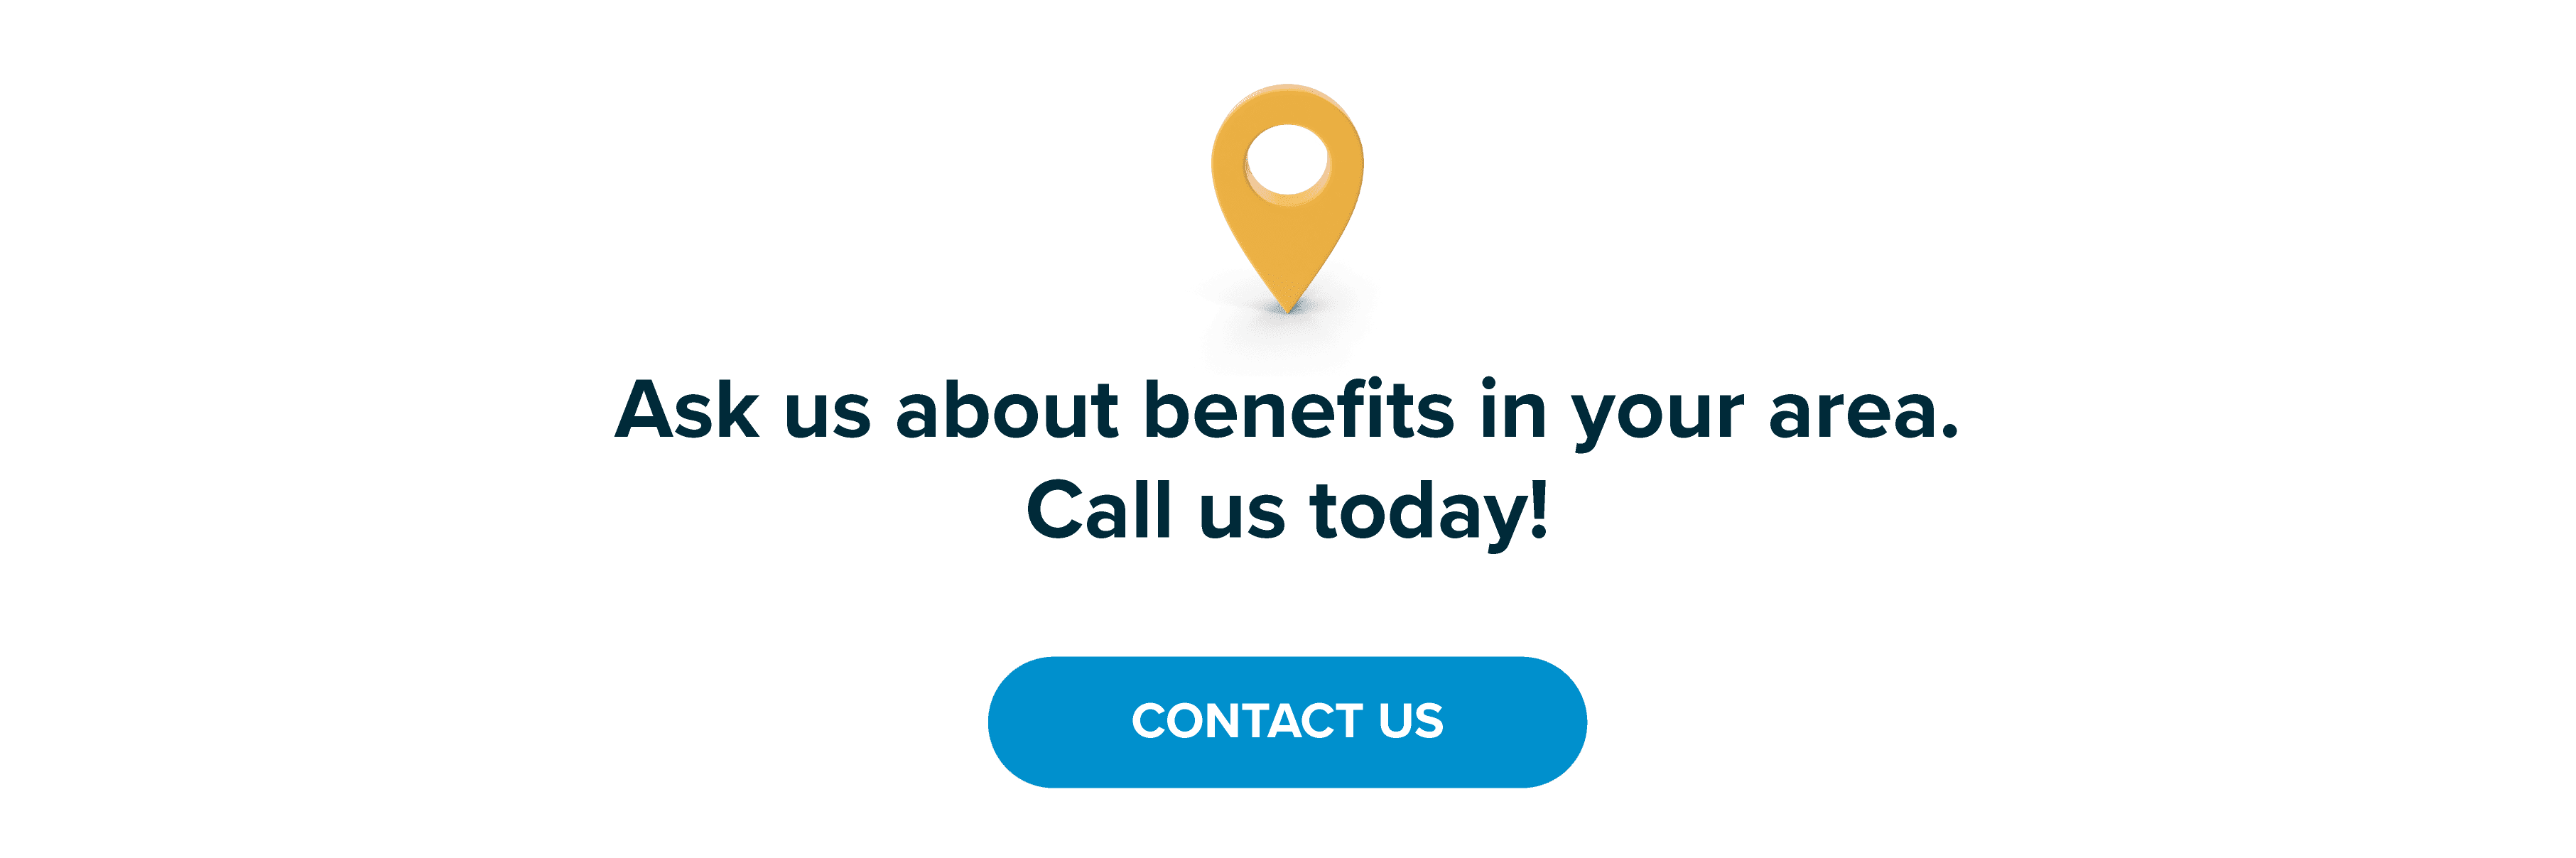 Ask us about benefits in your area!